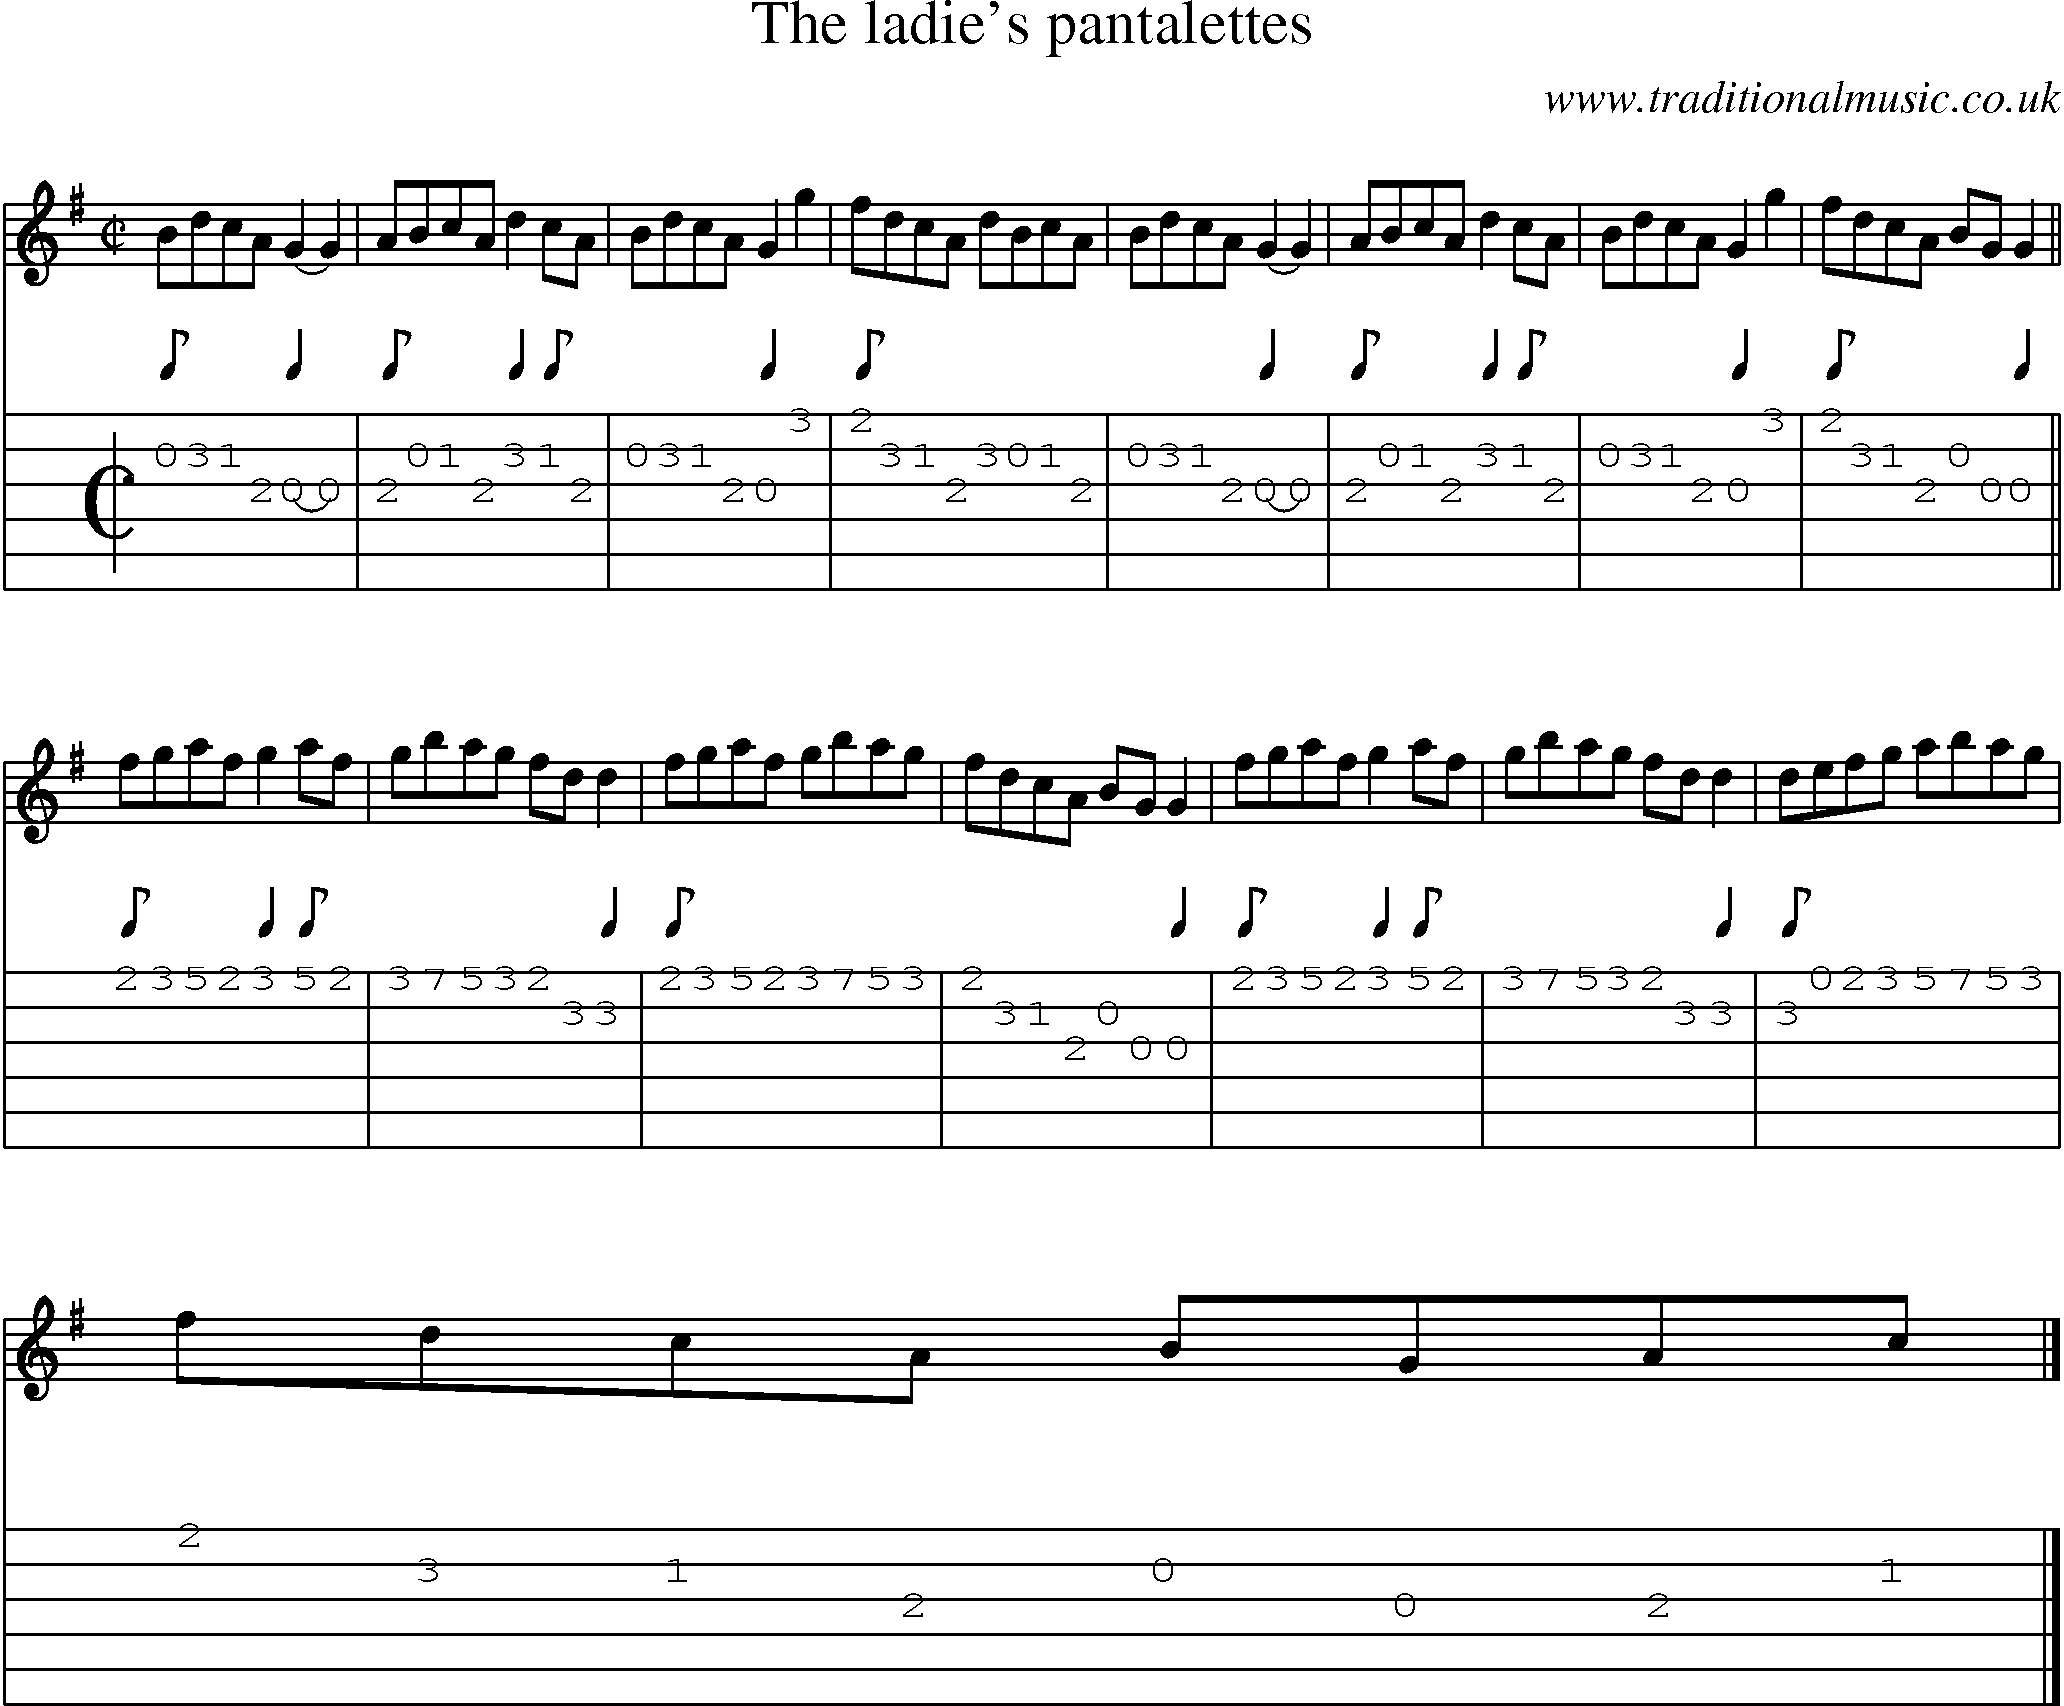 Music Score and Guitar Tabs for Ladies Pantalettes